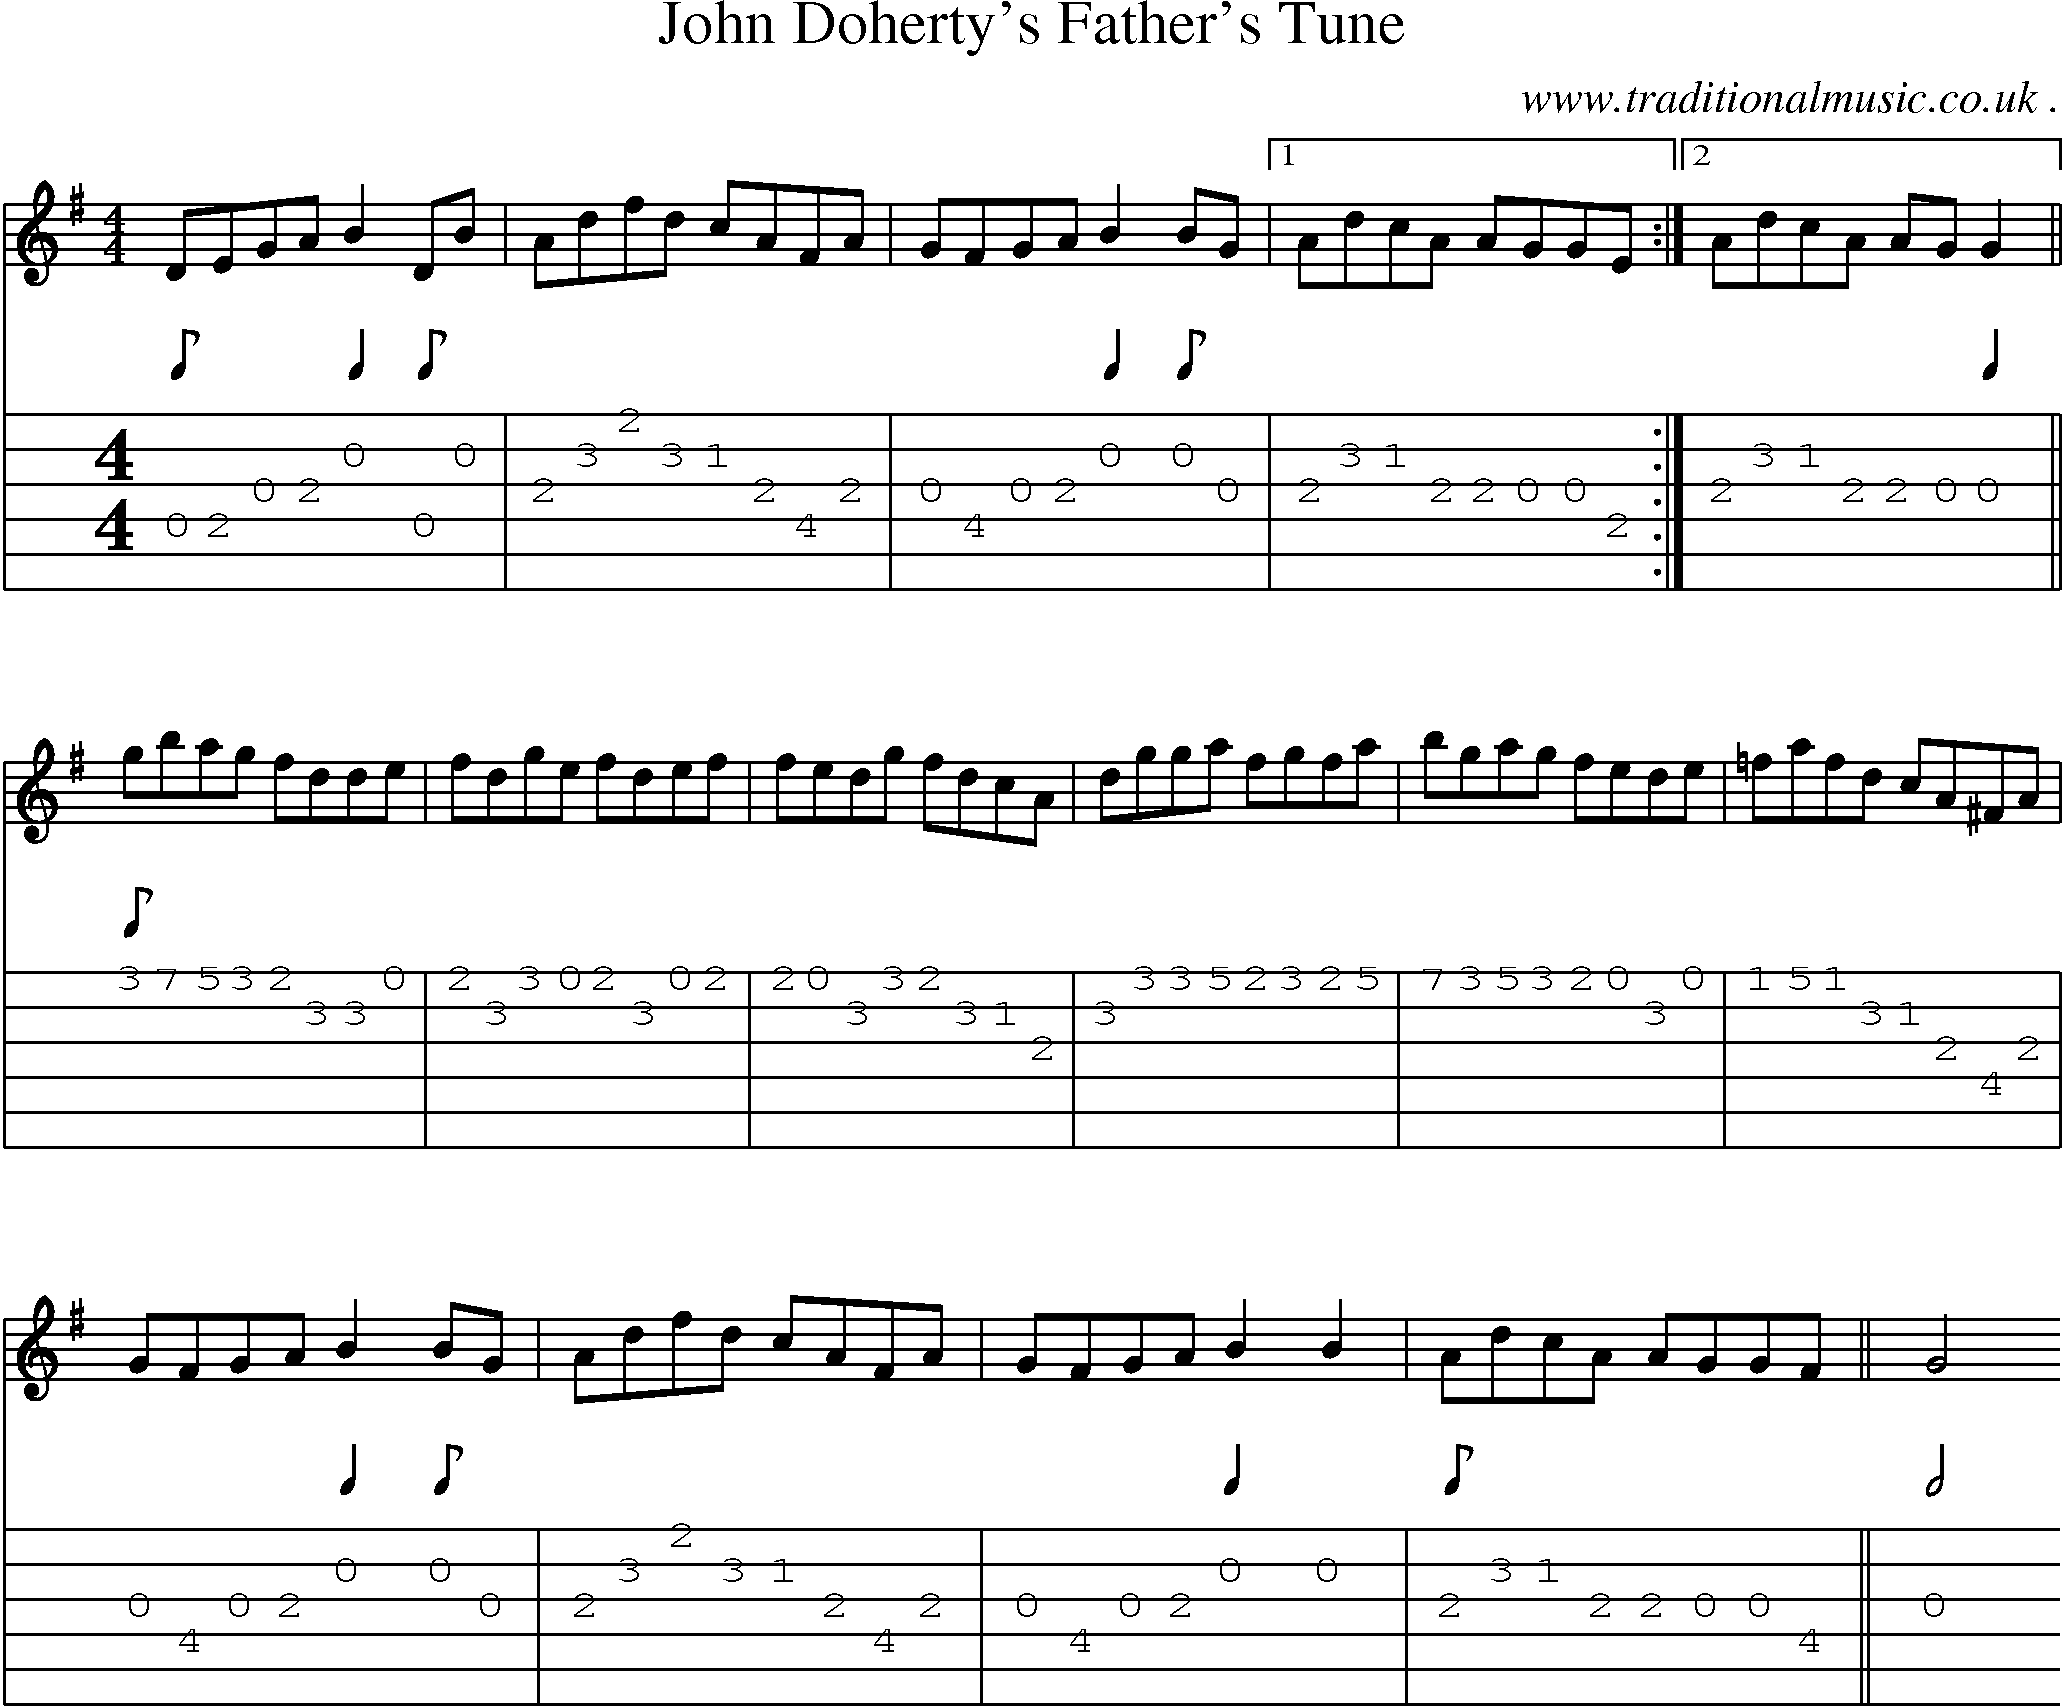 Sheet-Music and Guitar Tabs for John Dohertys Fathers Tune